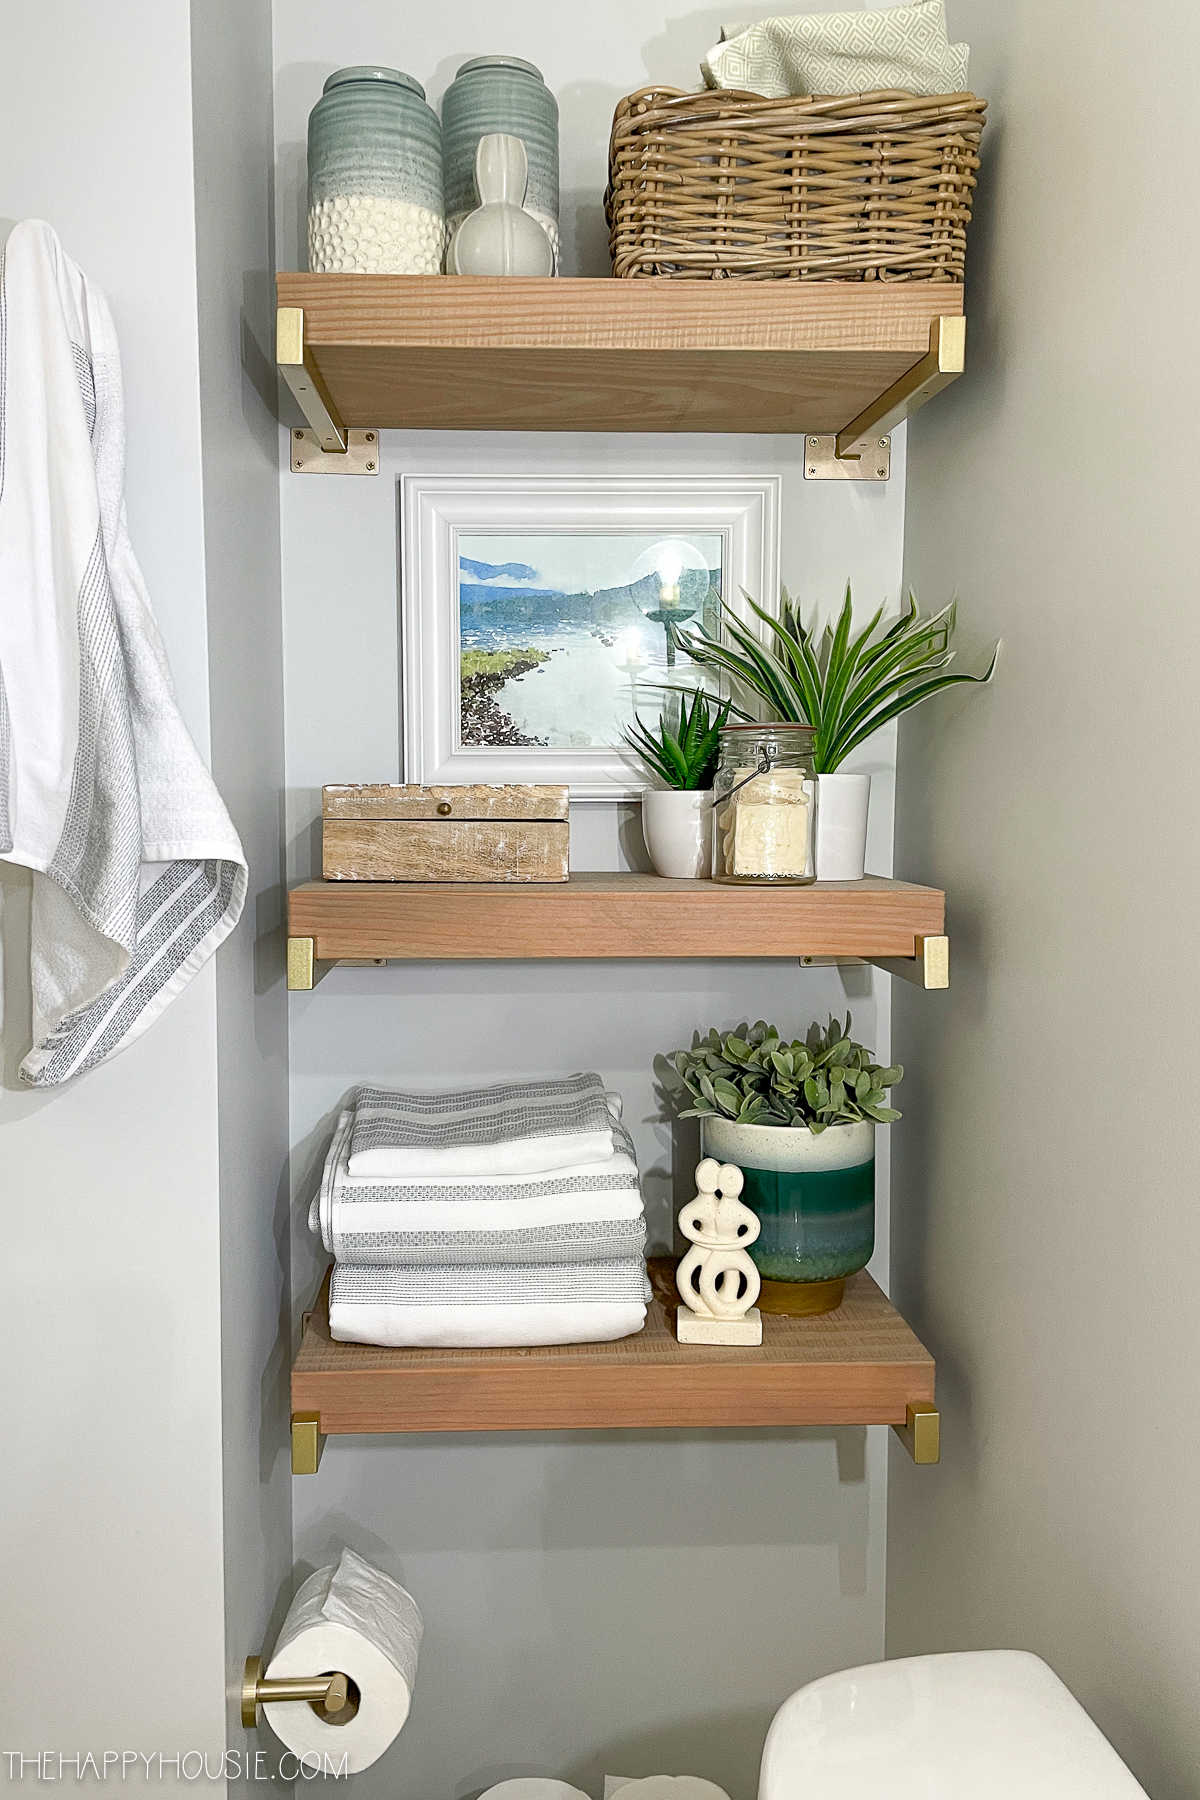 Wood shelves in recessed alcove of bathroom.